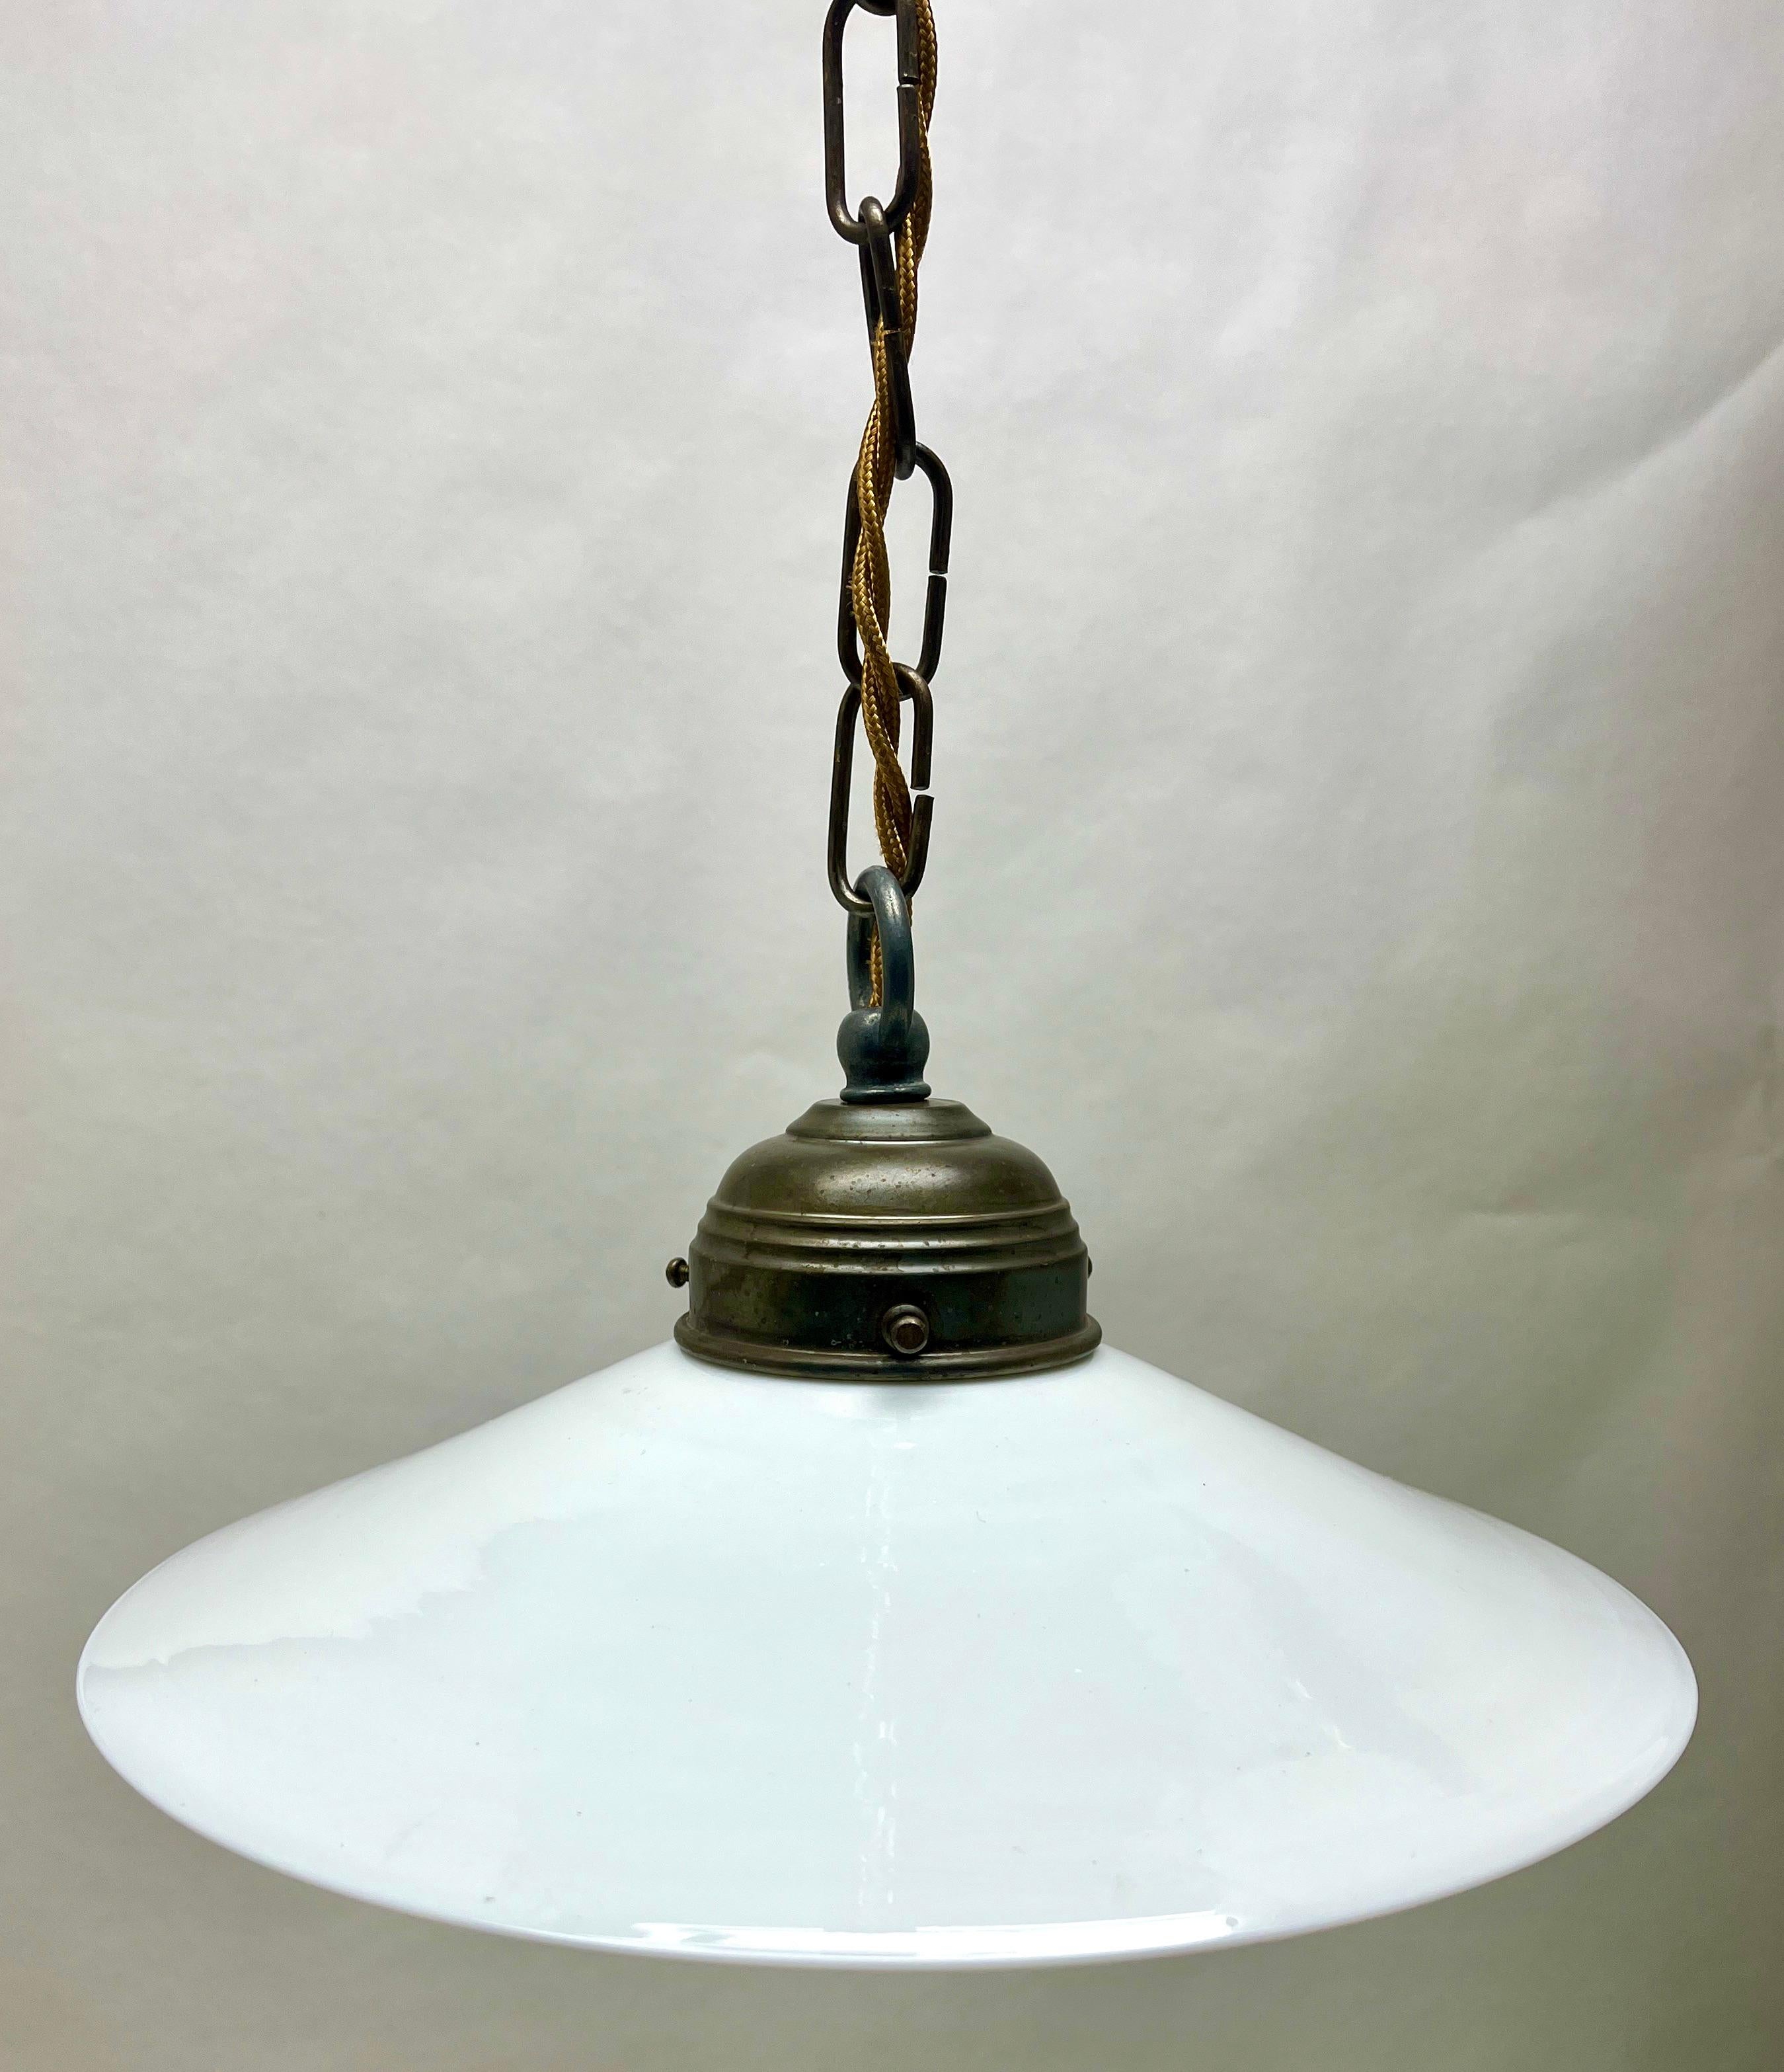 Art Nouveau ceiling lamp.
Photography fails to capture the simple elegant illumination provided by this lamp.

Fitting messing pendant ceiling light with screw fixing to hold a stylish Belgian Art Deco lampshade. 
Good distribution of darker and